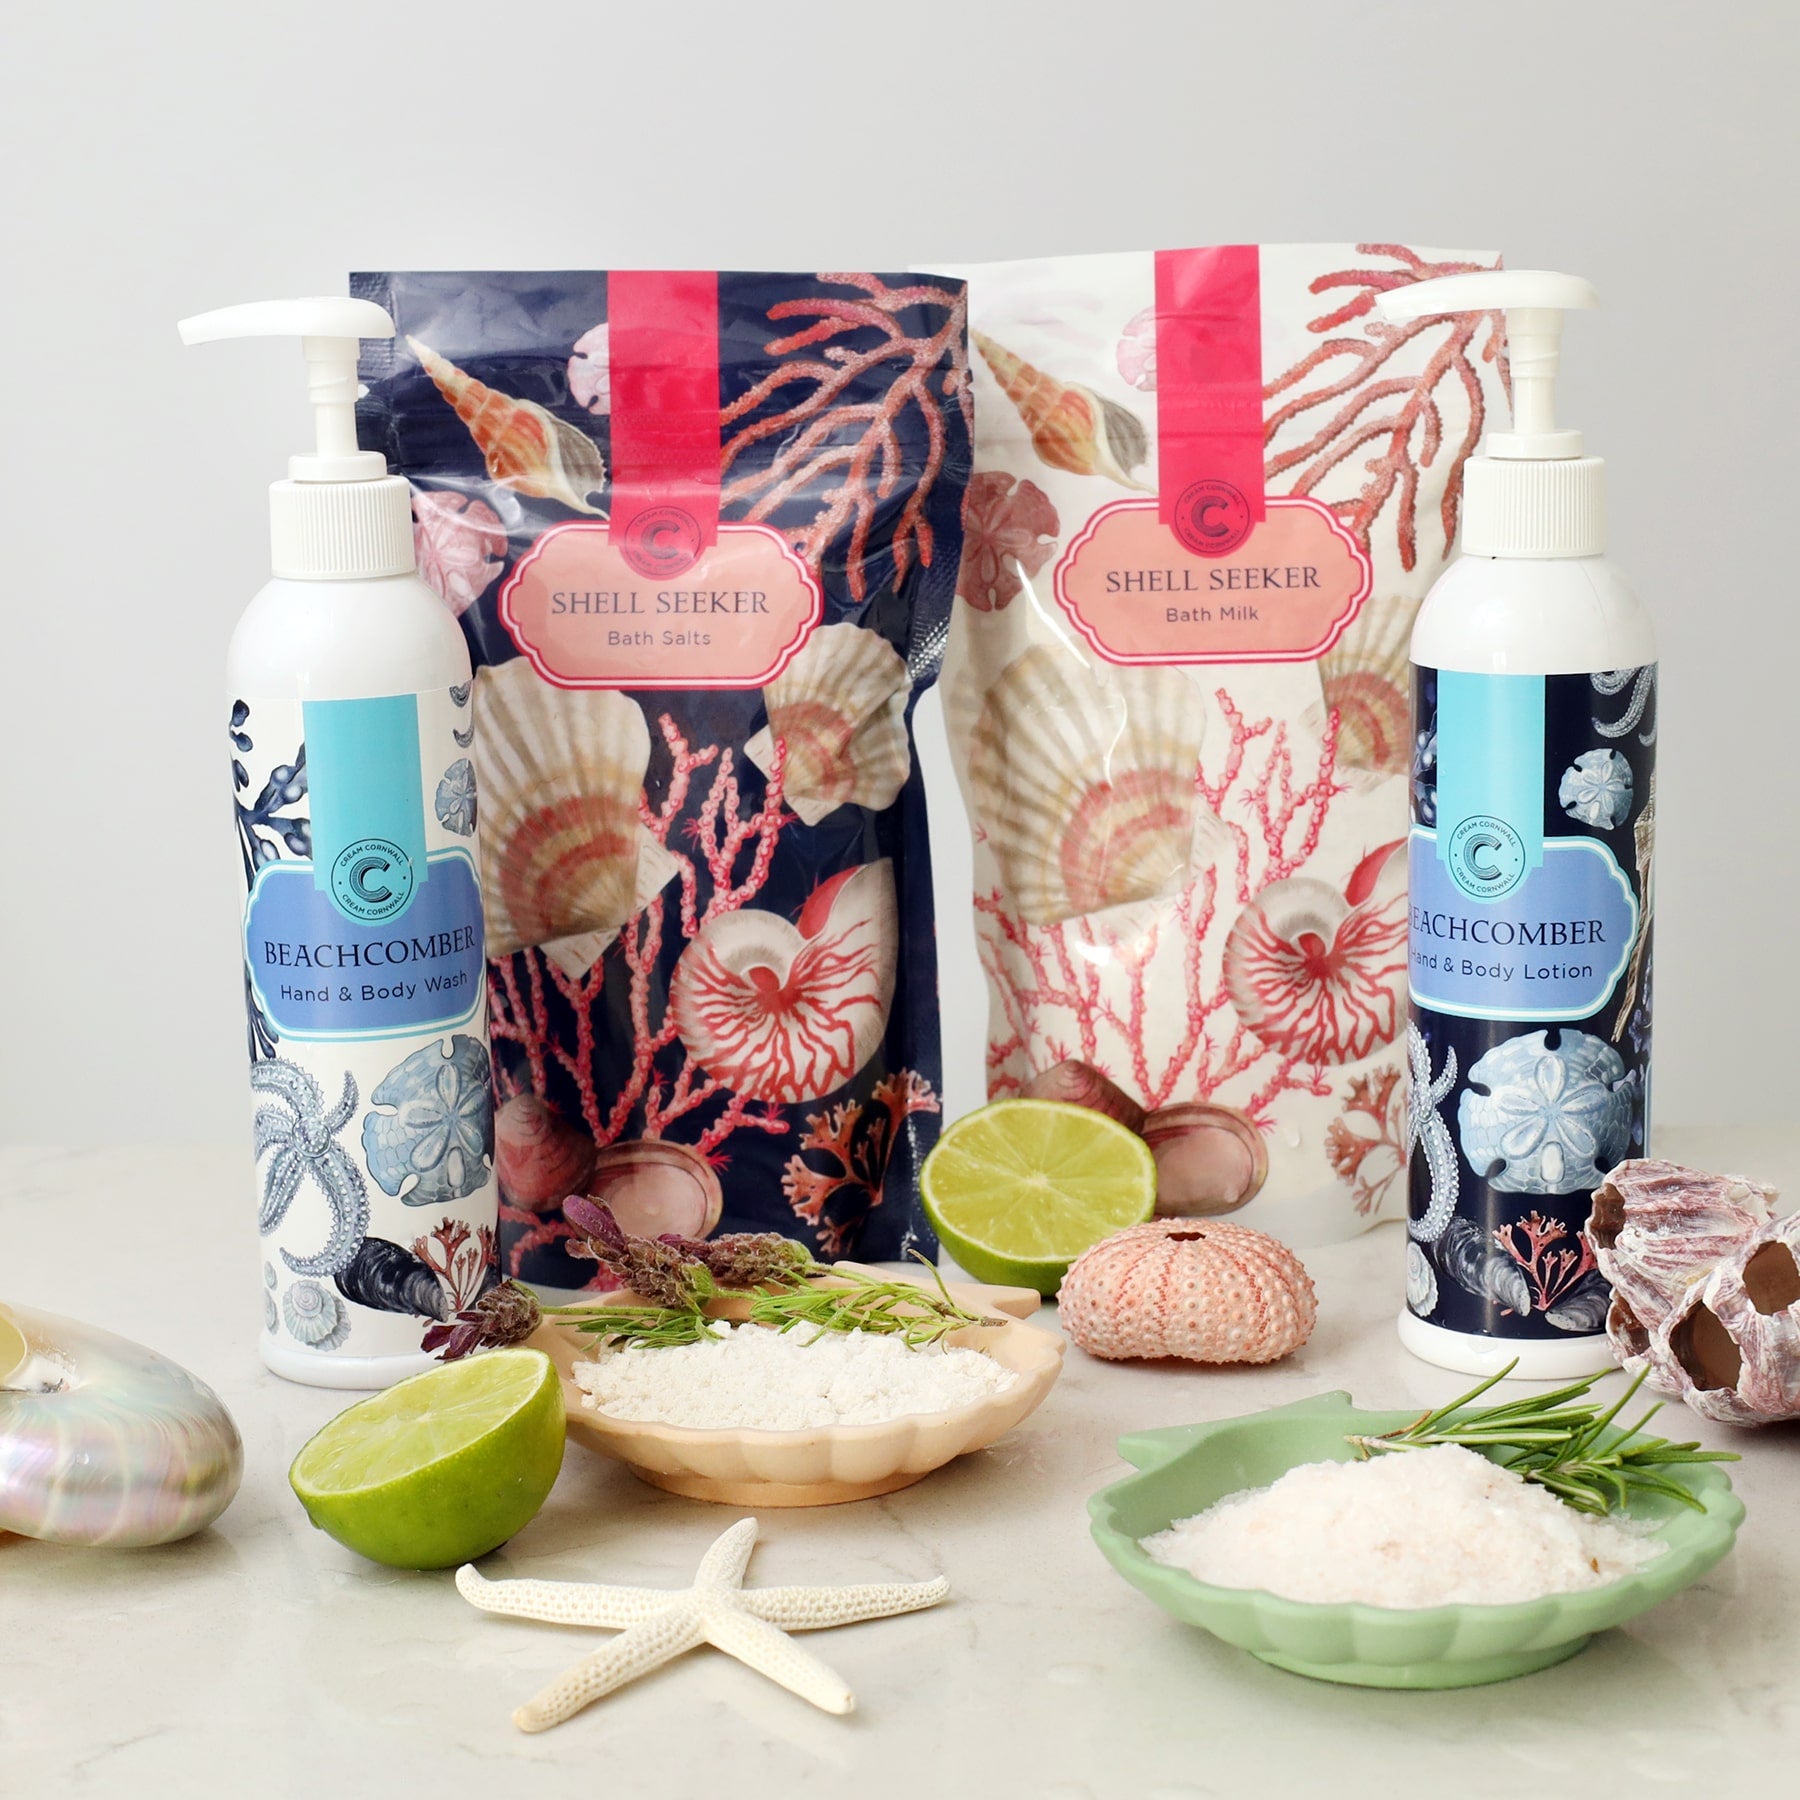 Beachcomber Hand and Body Lotion